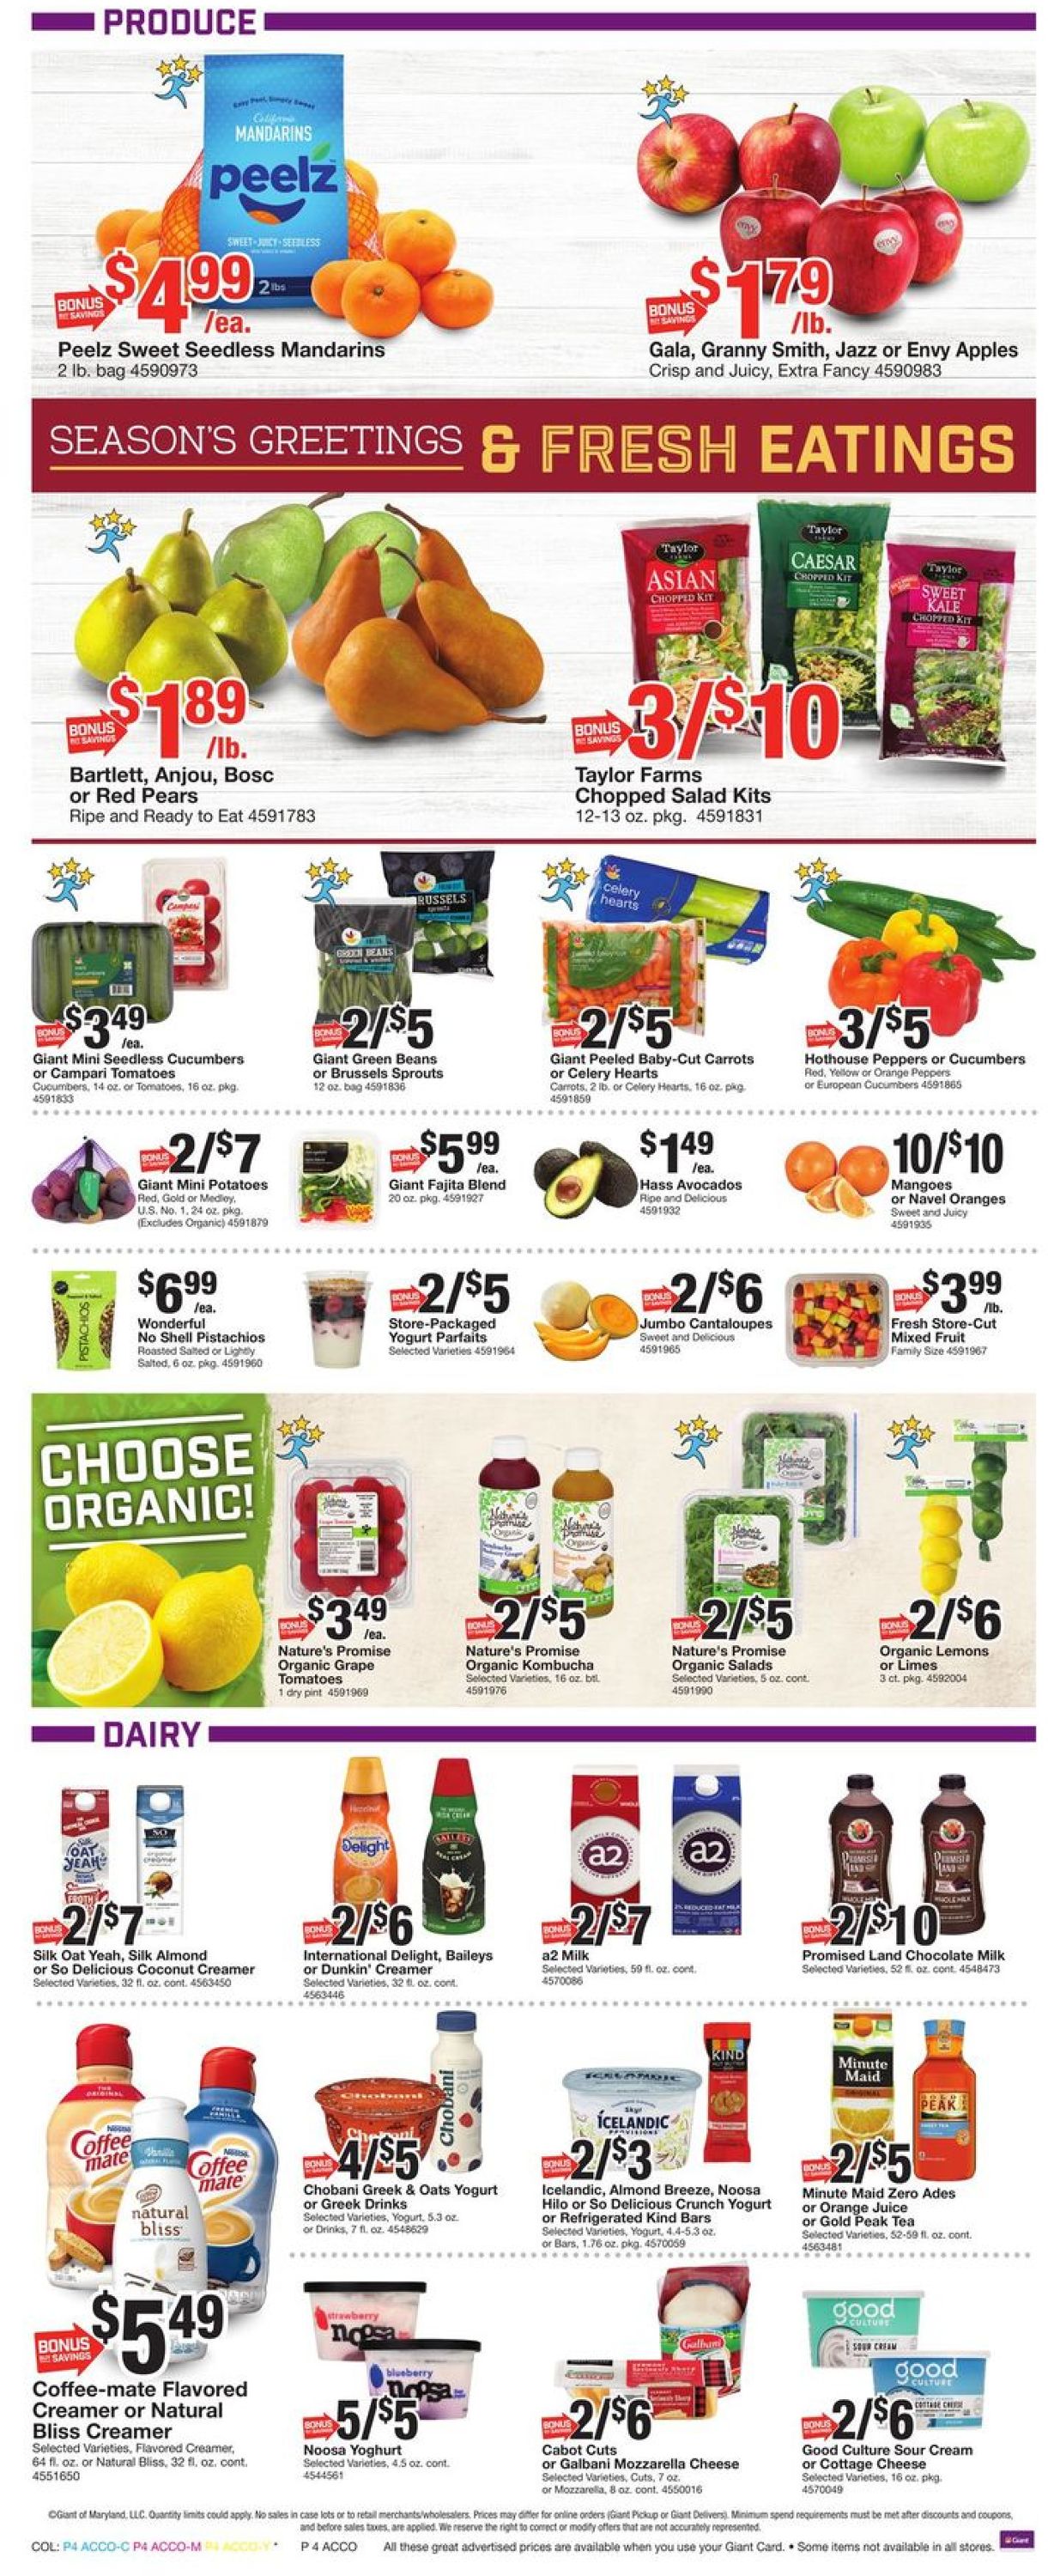 Giant Food Black Friday 2020 Current weekly ad 11/27 - 12/03/2020 [9 ...